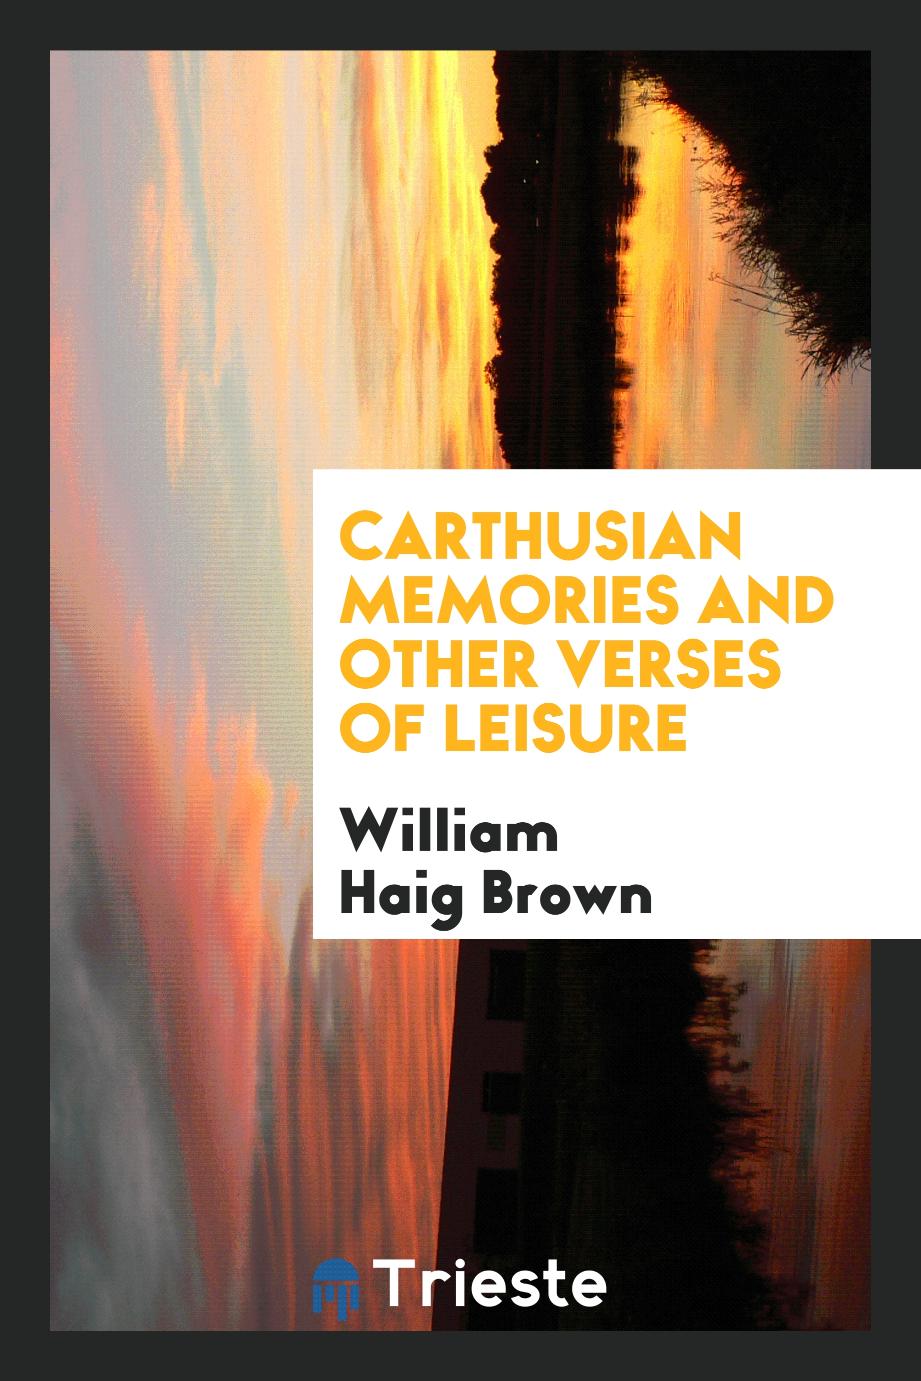 Carthusian Memories and Other Verses of Leisure